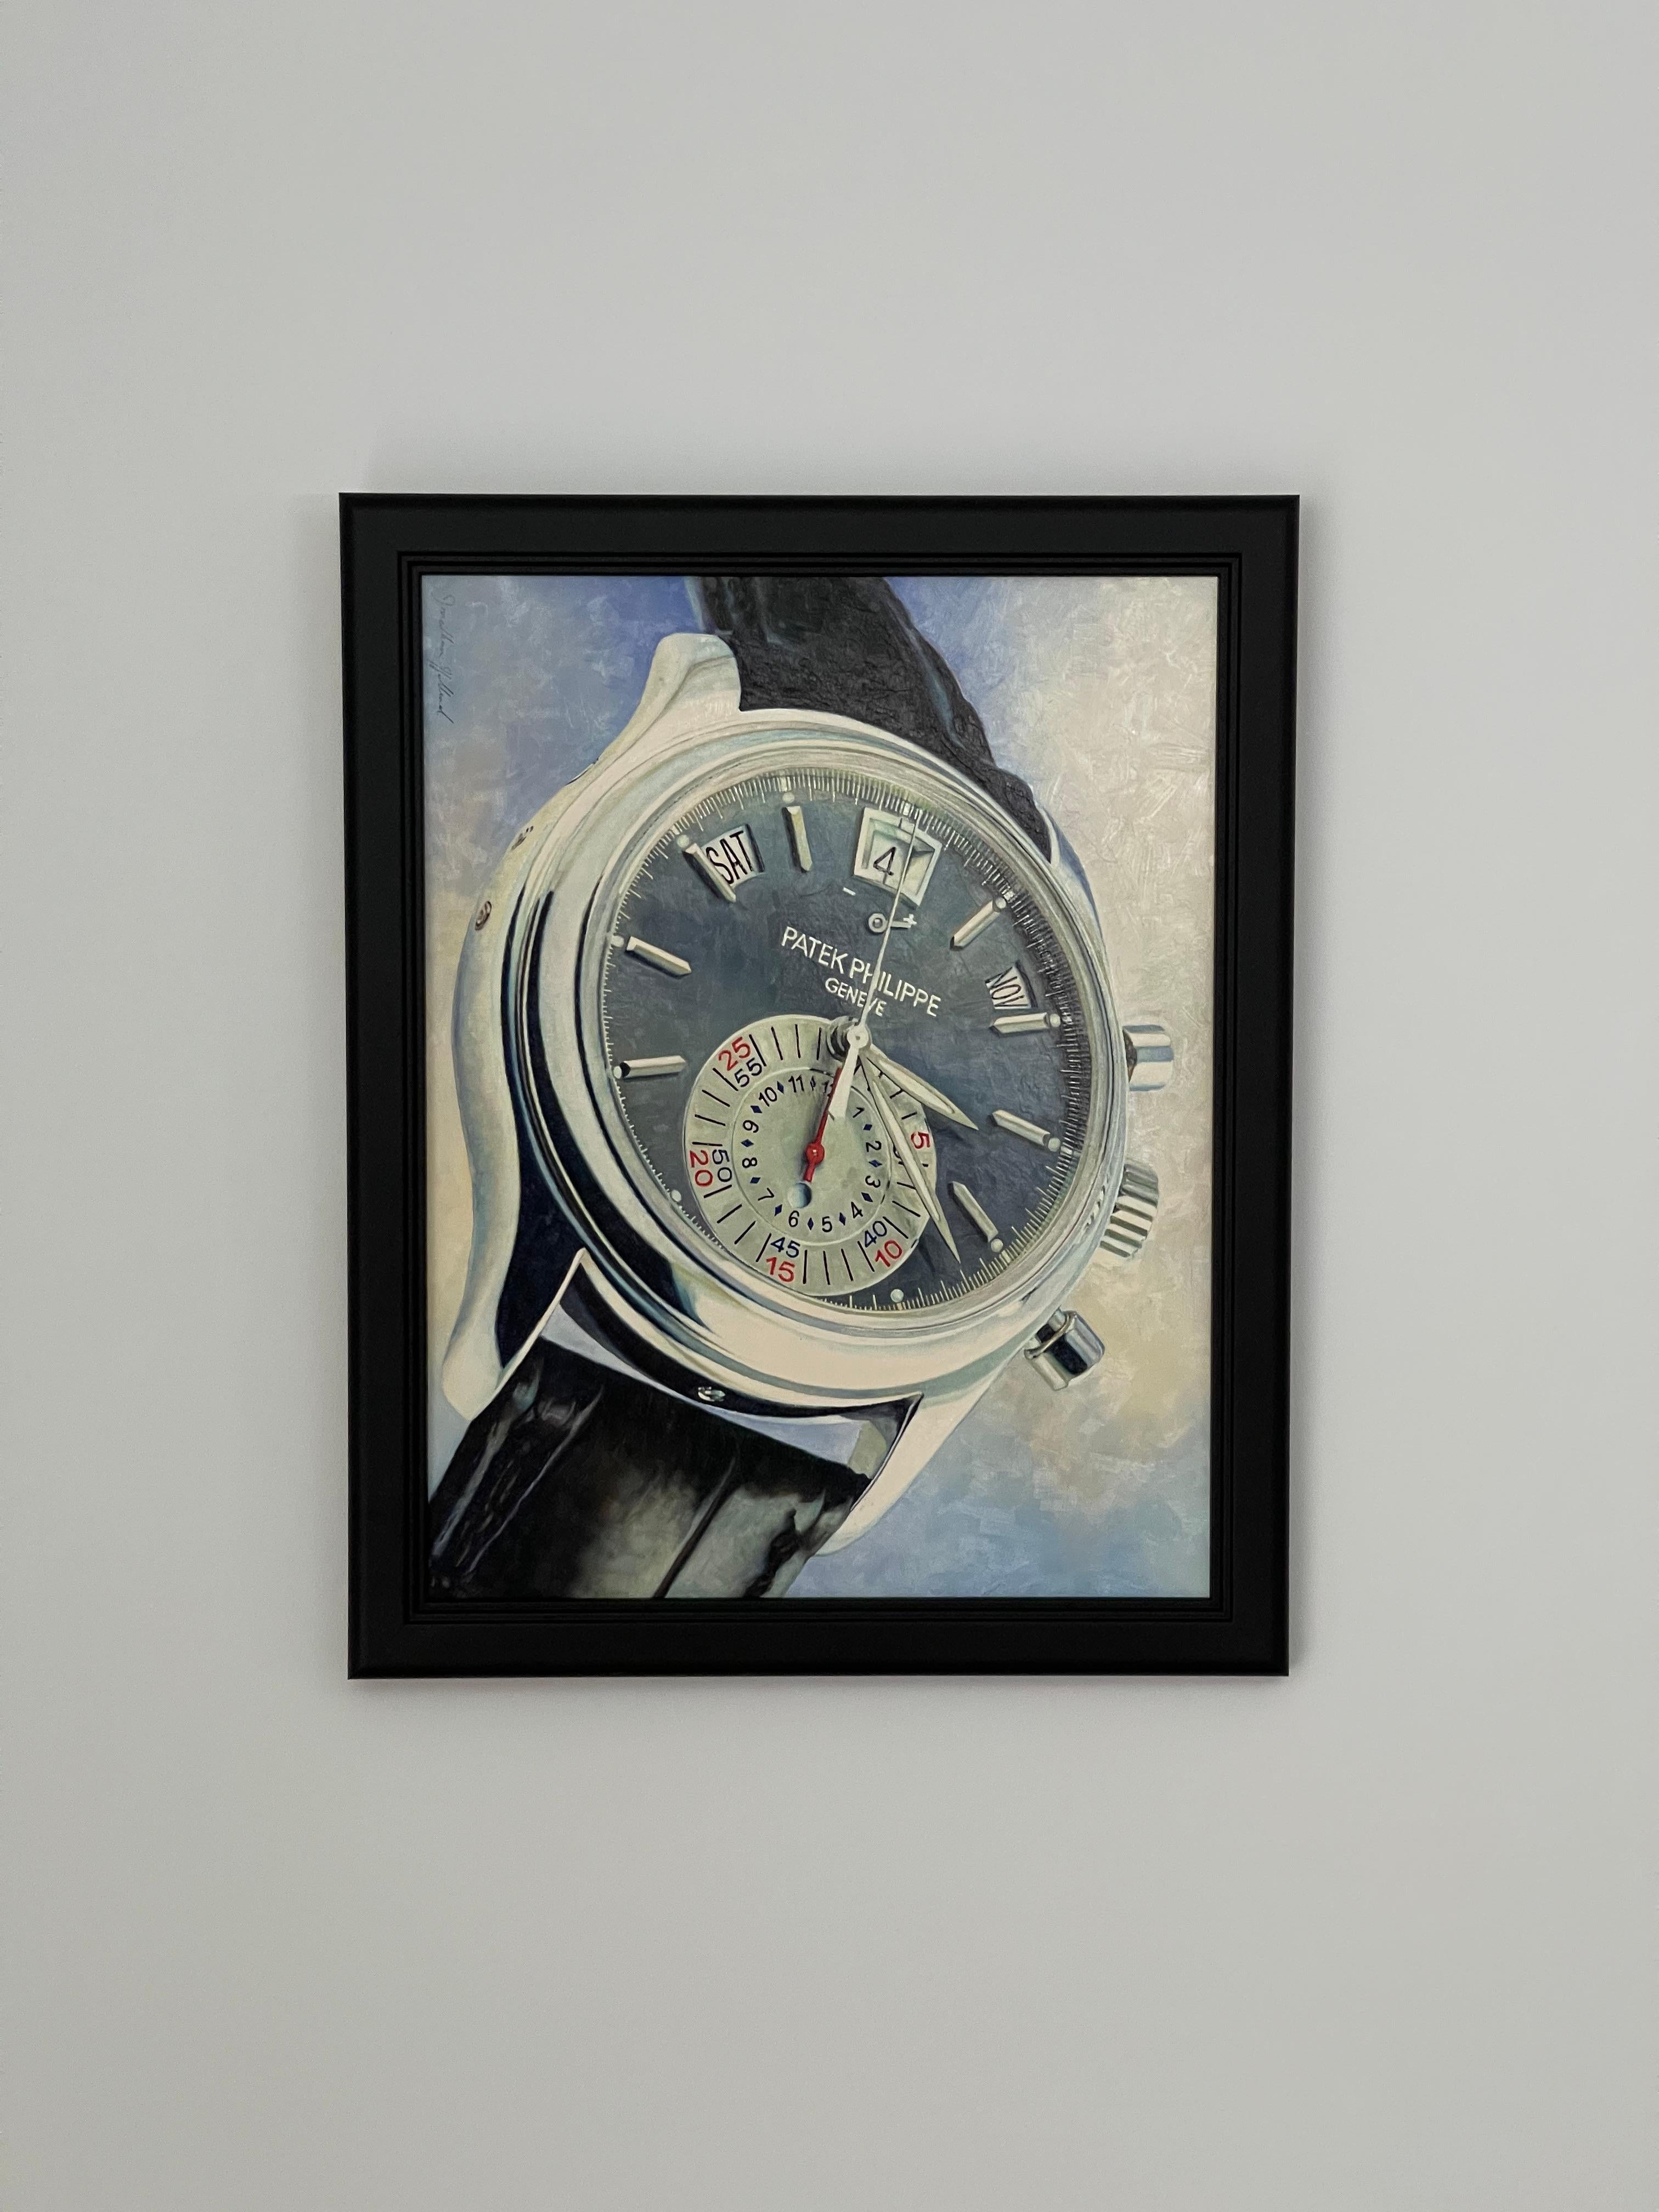 Canadian Patek Philippe 5960P Annual Calendar Chronograph wall art oil painting For Sale